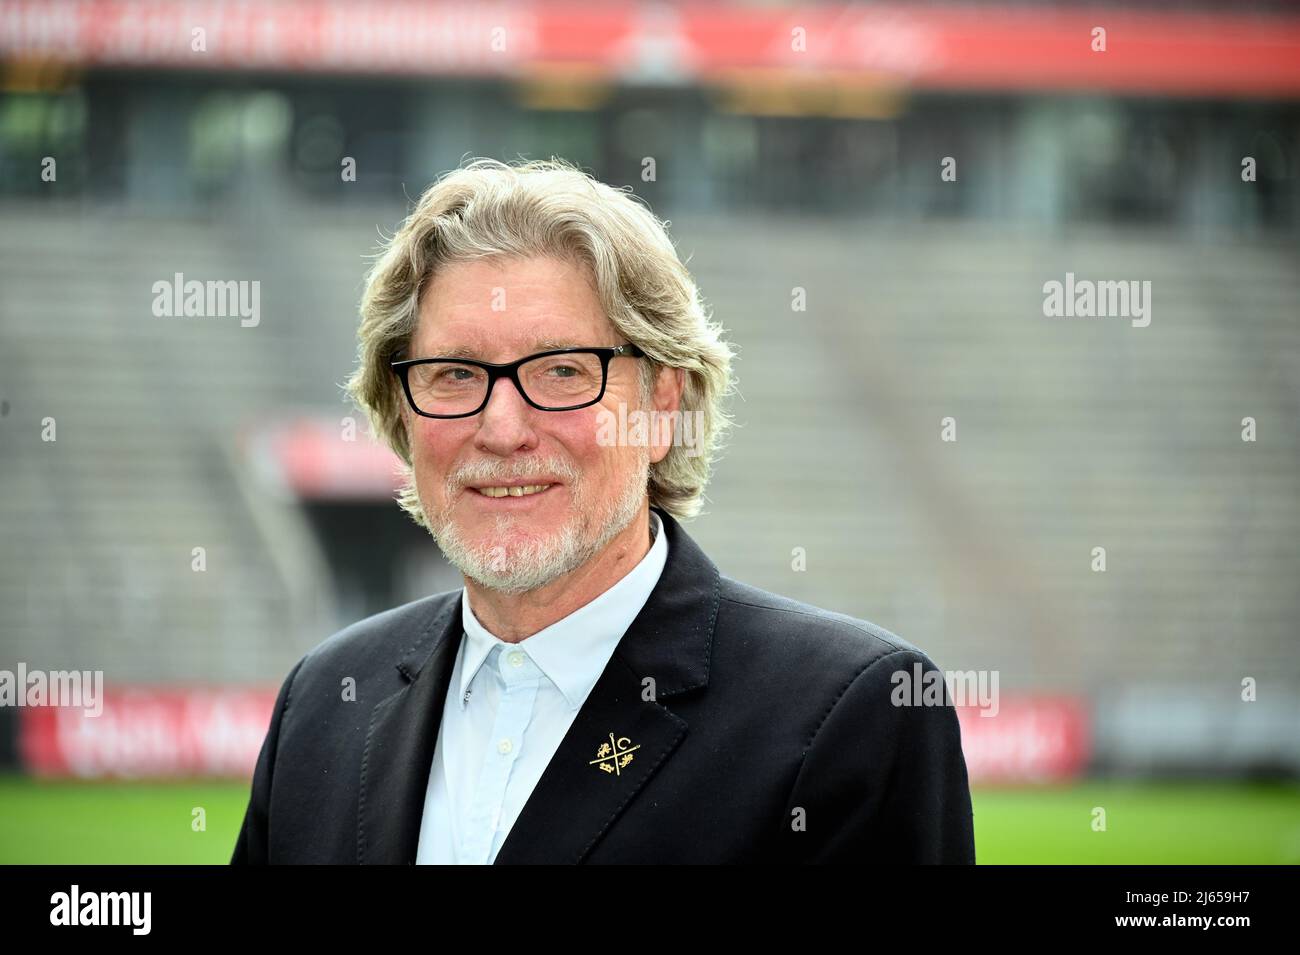 Cologne, Germany. 26th Apr, 2022. Sportsman Harald Anton Toni Schumacher,  Sports Ambassador of the City of Cologne at the press event for the DFB  Women's Cup Final between VfL Wolfsburg and Turbine